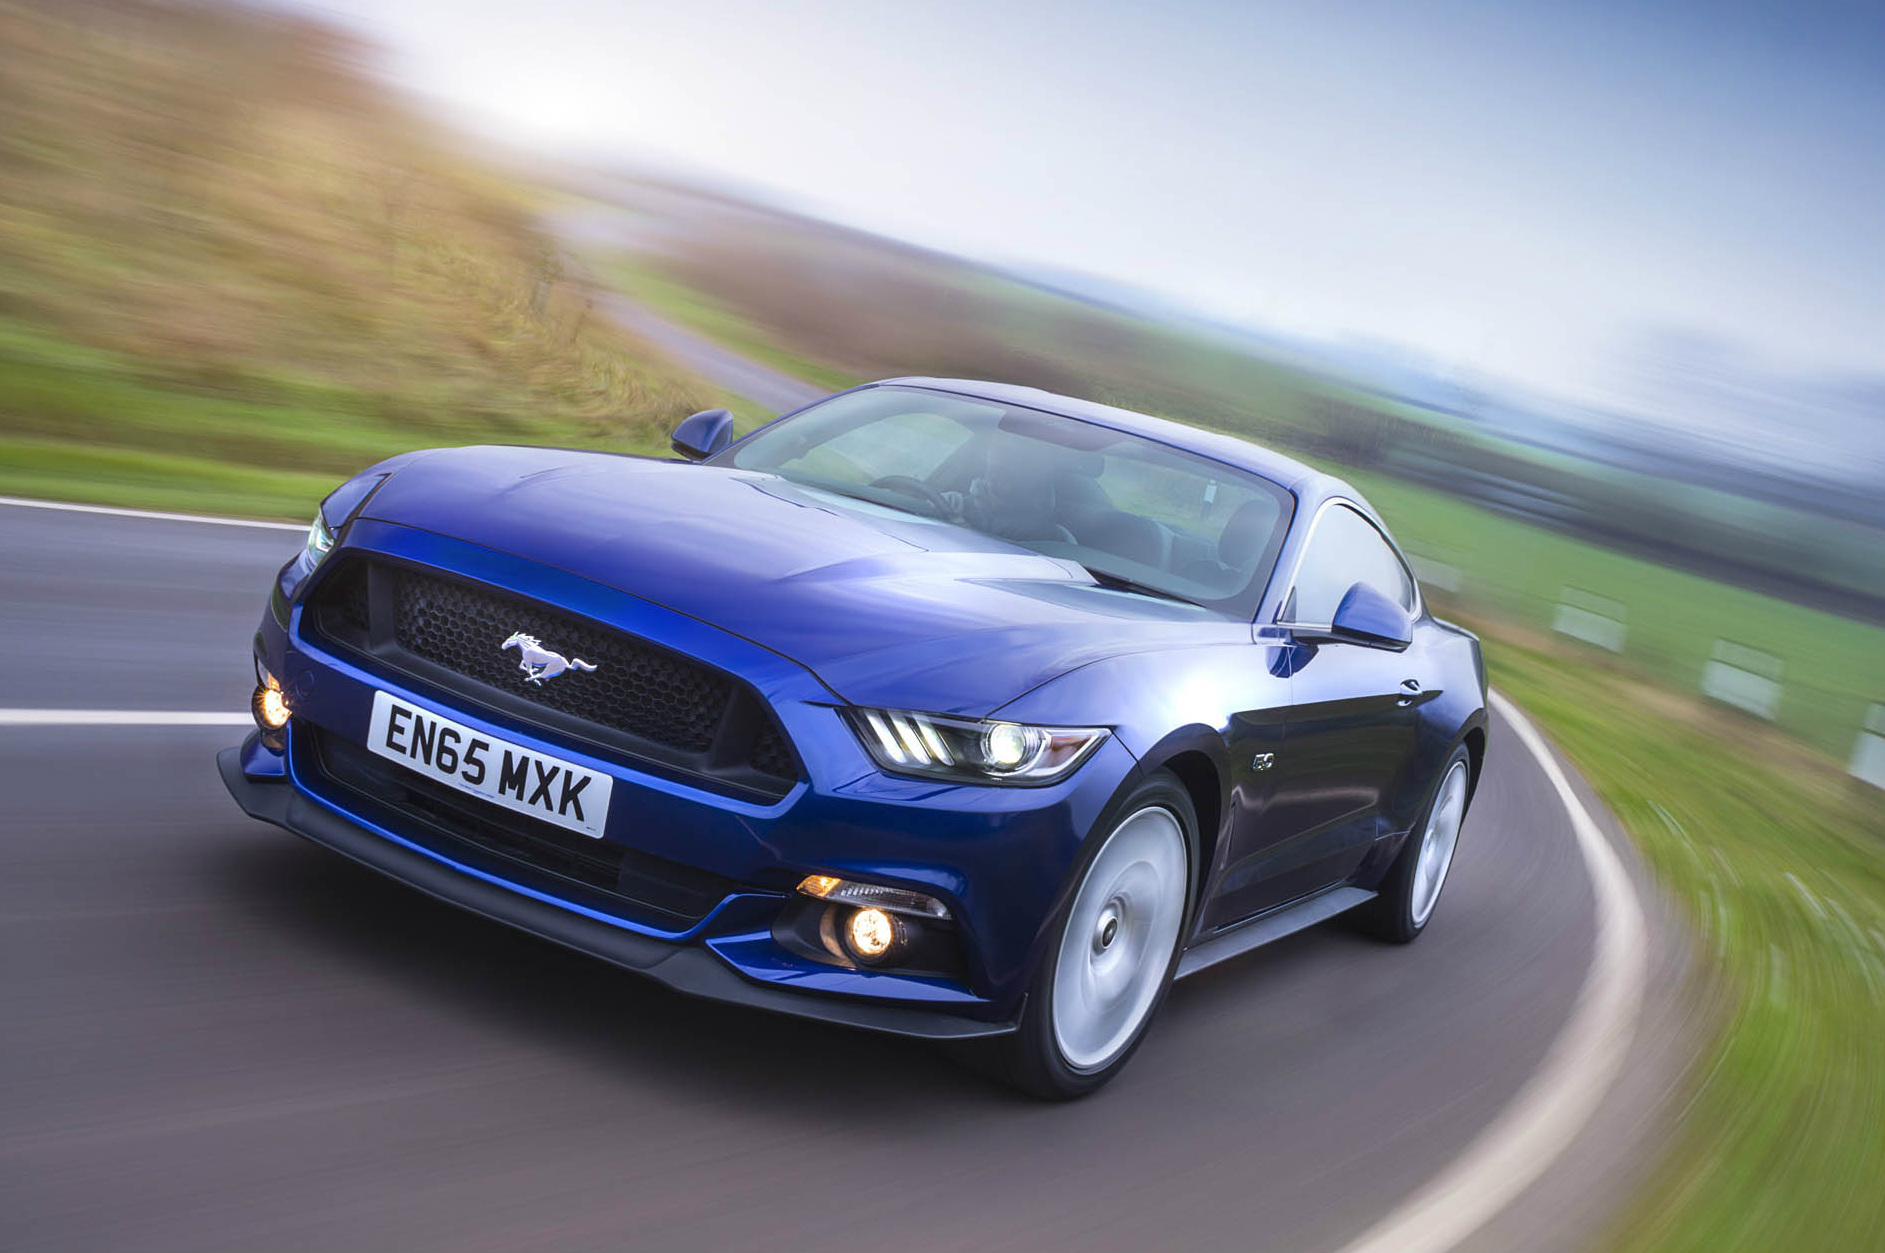 Wild pony takes on Munich muscle: 2016 Ford Mustang 5.0 V8 GT Fastback vs BMW M4